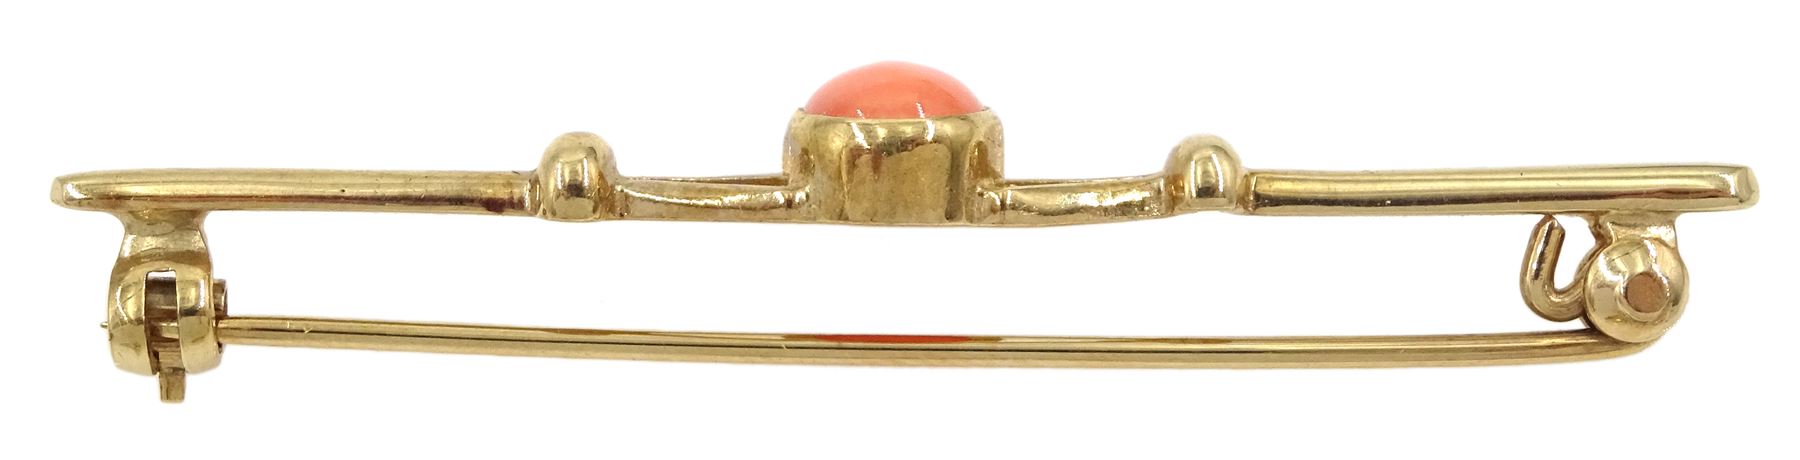 Gold single stone opal ring - Image 2 of 4